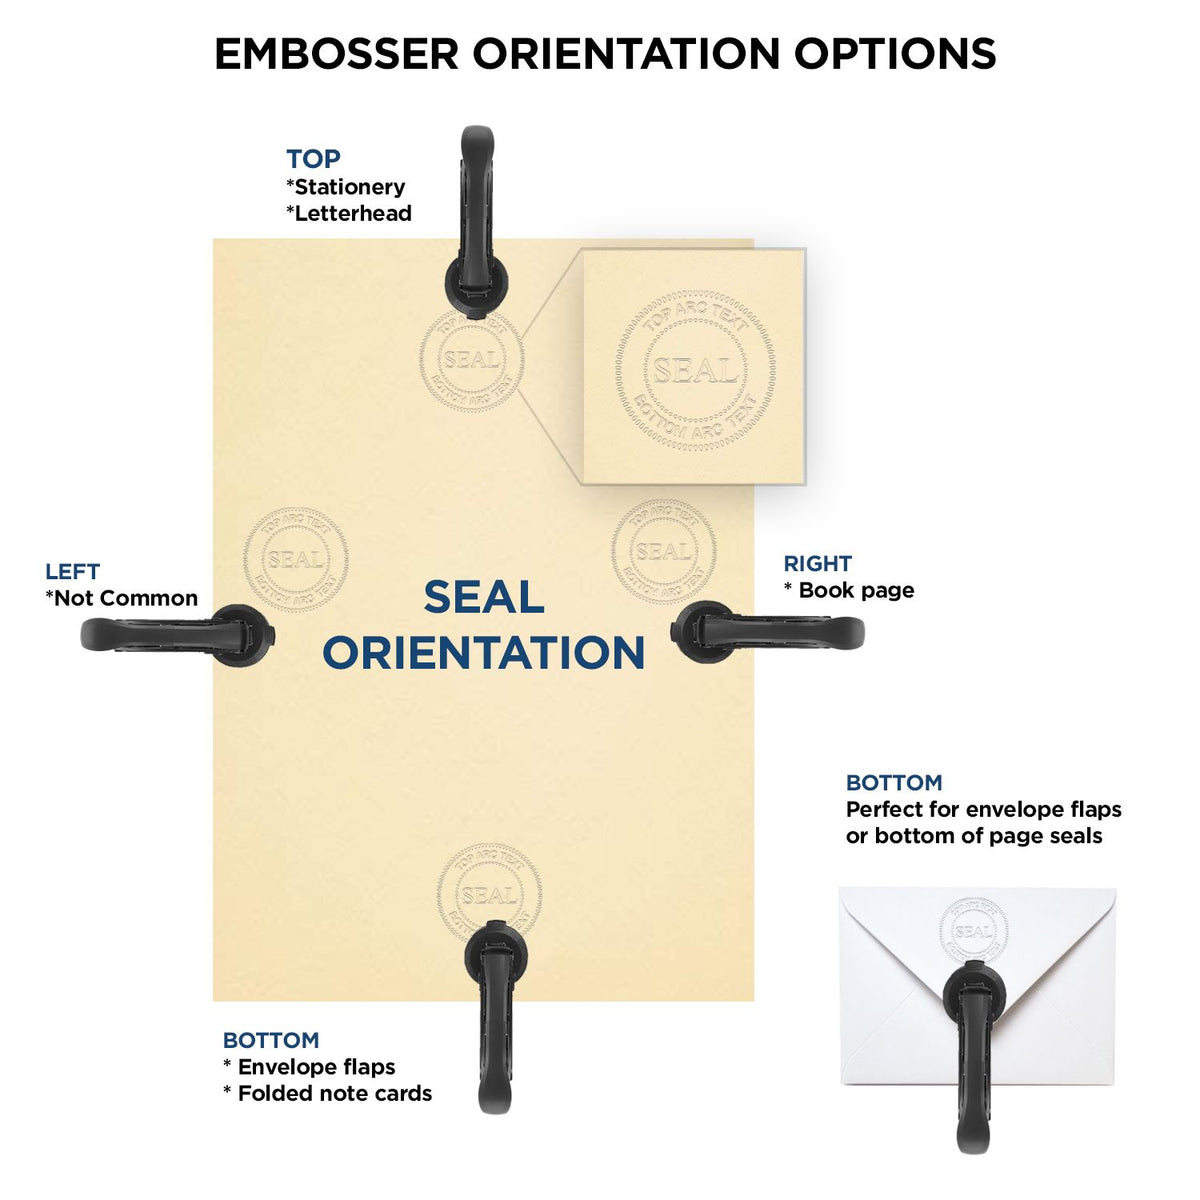 An infographic for the Extended Long Reach Alabama Surveyor Embosser showing embosser orientation, this is showing examples of a top, bottom, right and left insert.